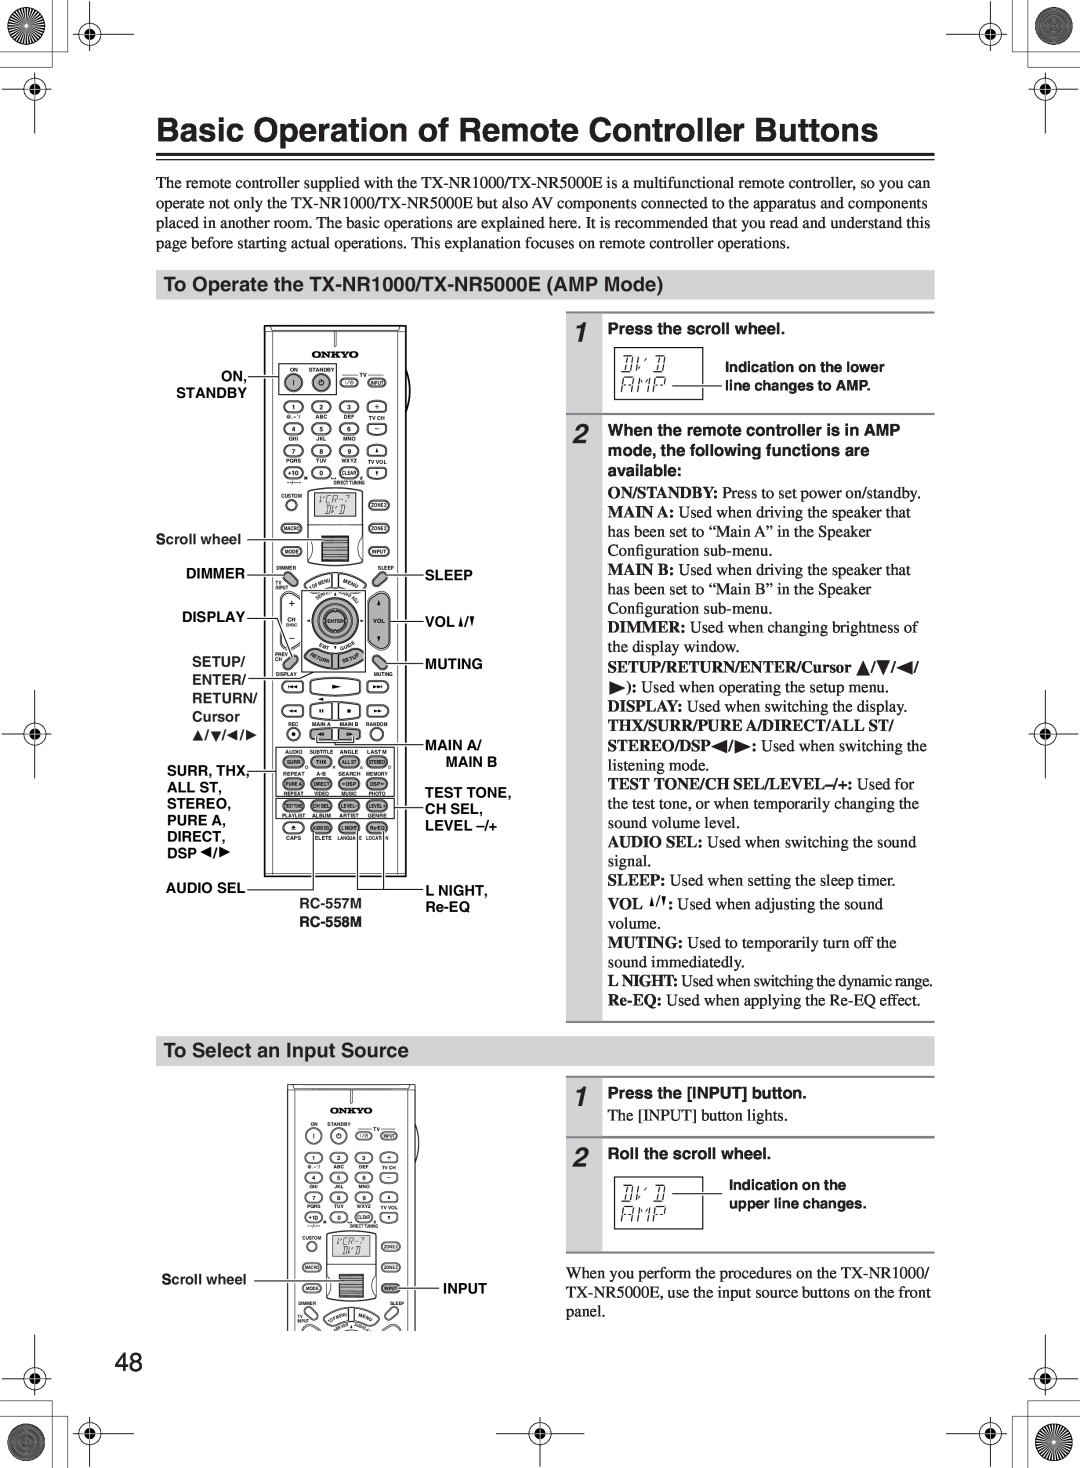 Onkyo instruction manual Basic Operation of Remote Controller Buttons, To Operate the TX-NR1000/TX-NR5000EAMP Mode 